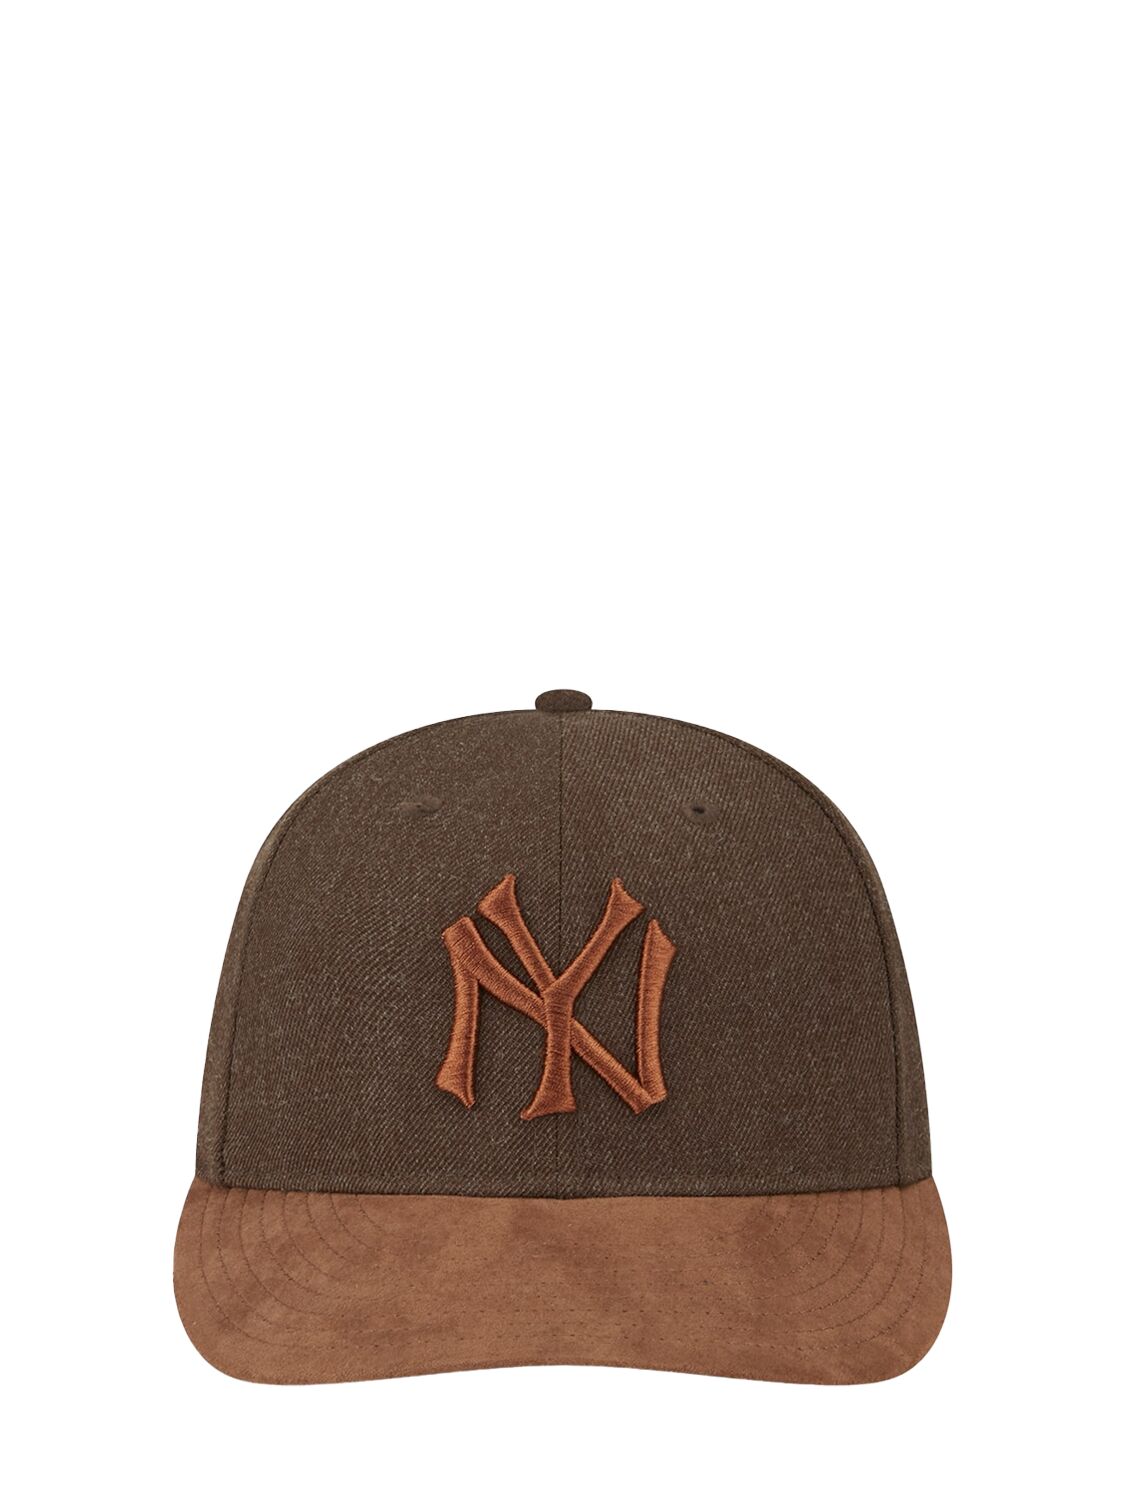 New Era 9fifty New York Yankees Hat In Brown